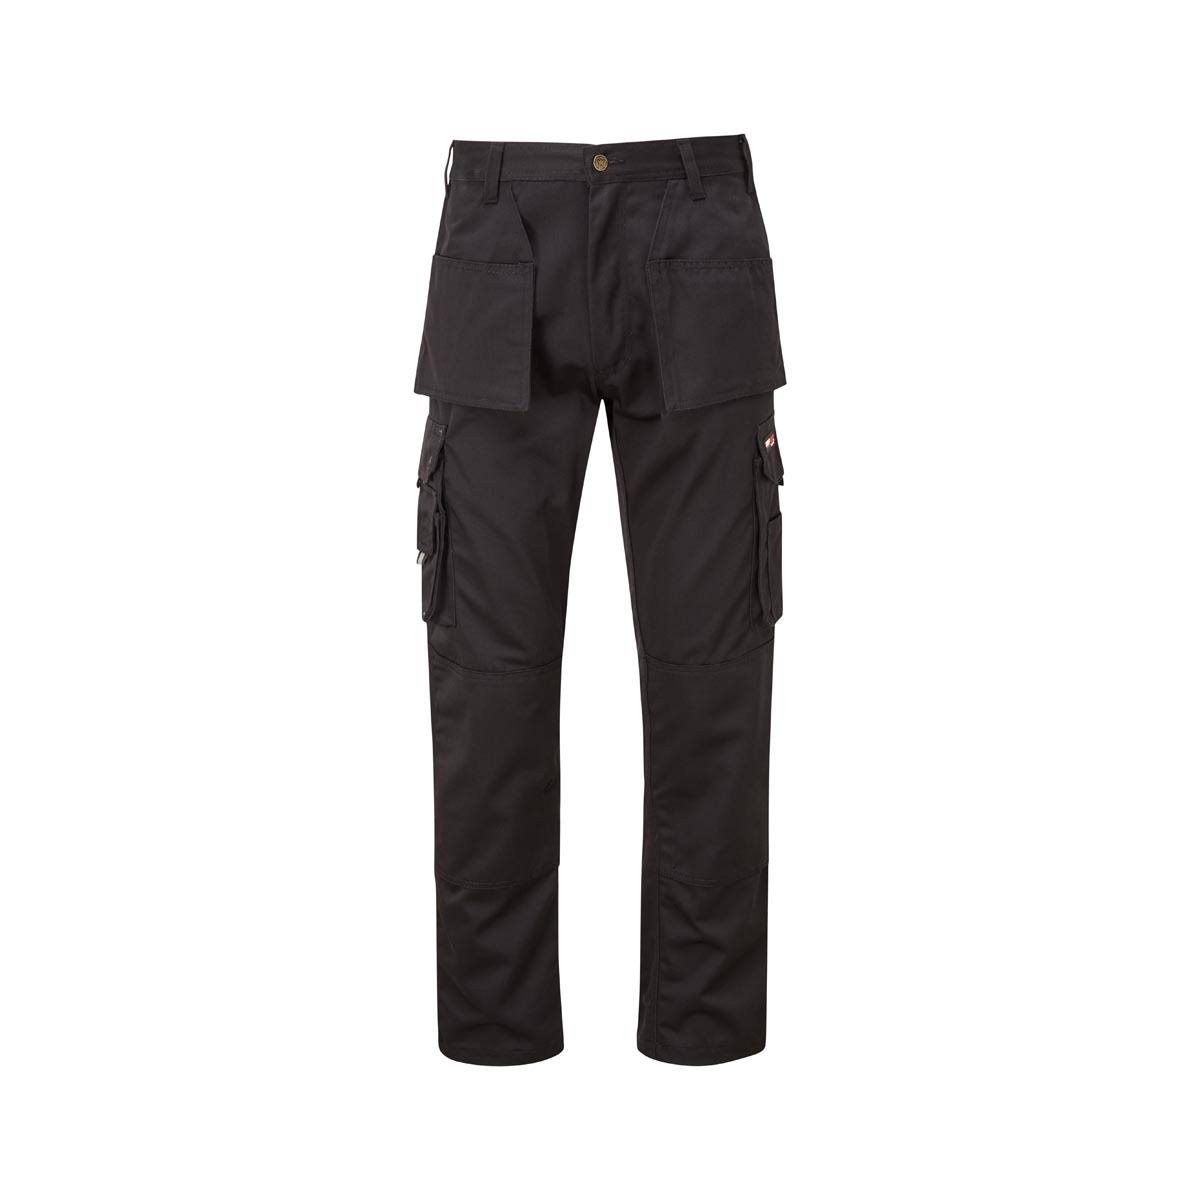 Tuffstuff 711-BLK-32R 711 Pro Work Trousers Black - 32R | By Toolden